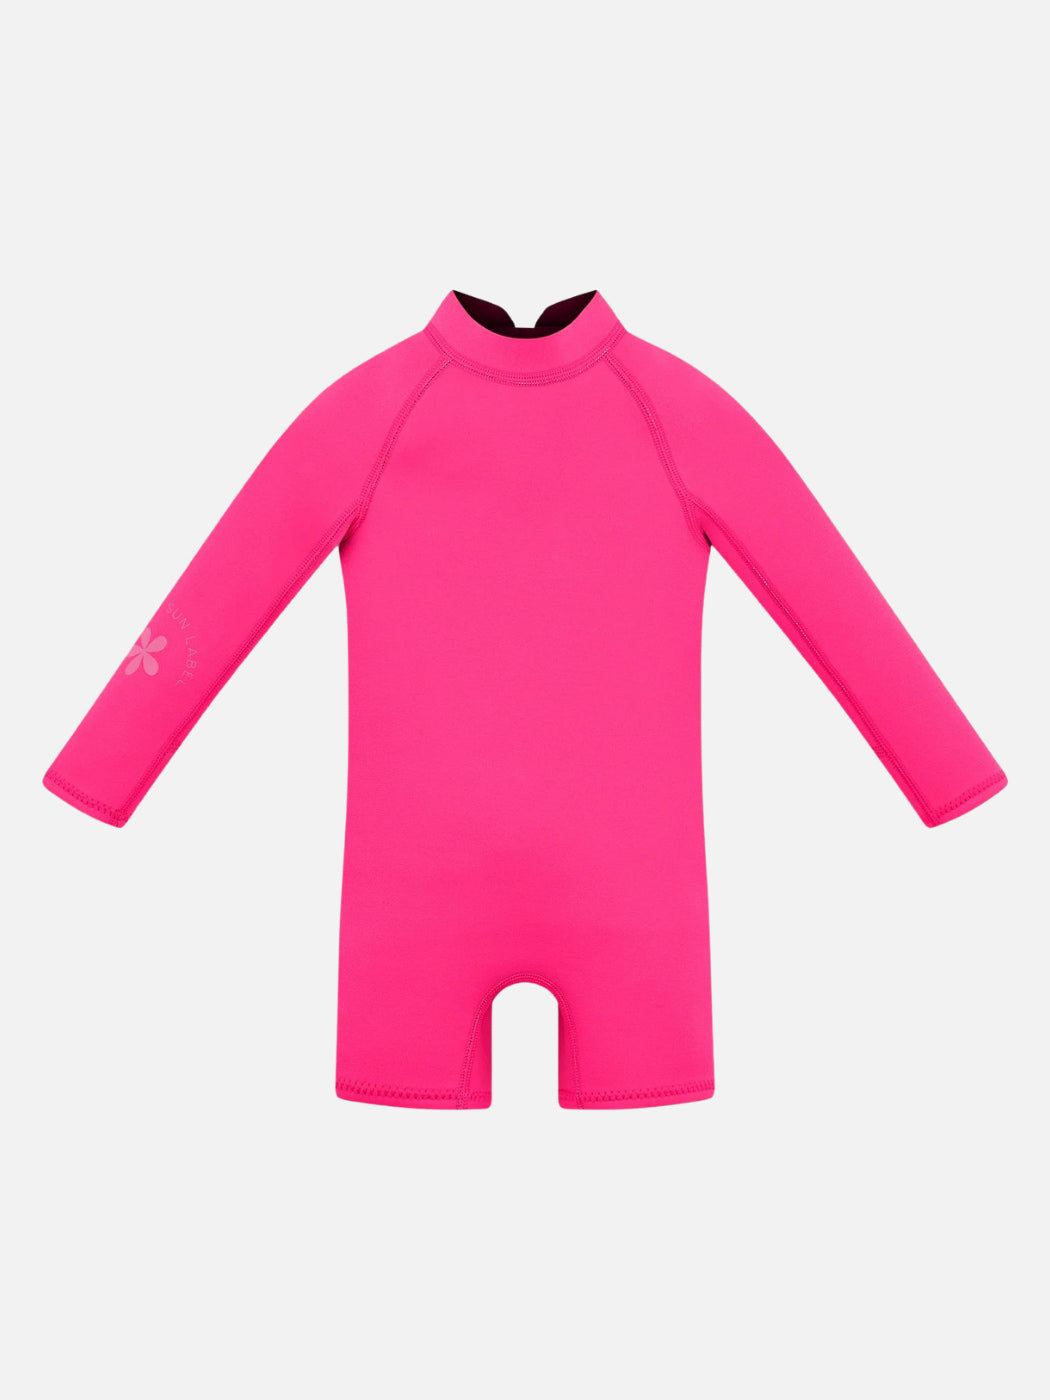 Springsuit Wetsuit - Candy Pink